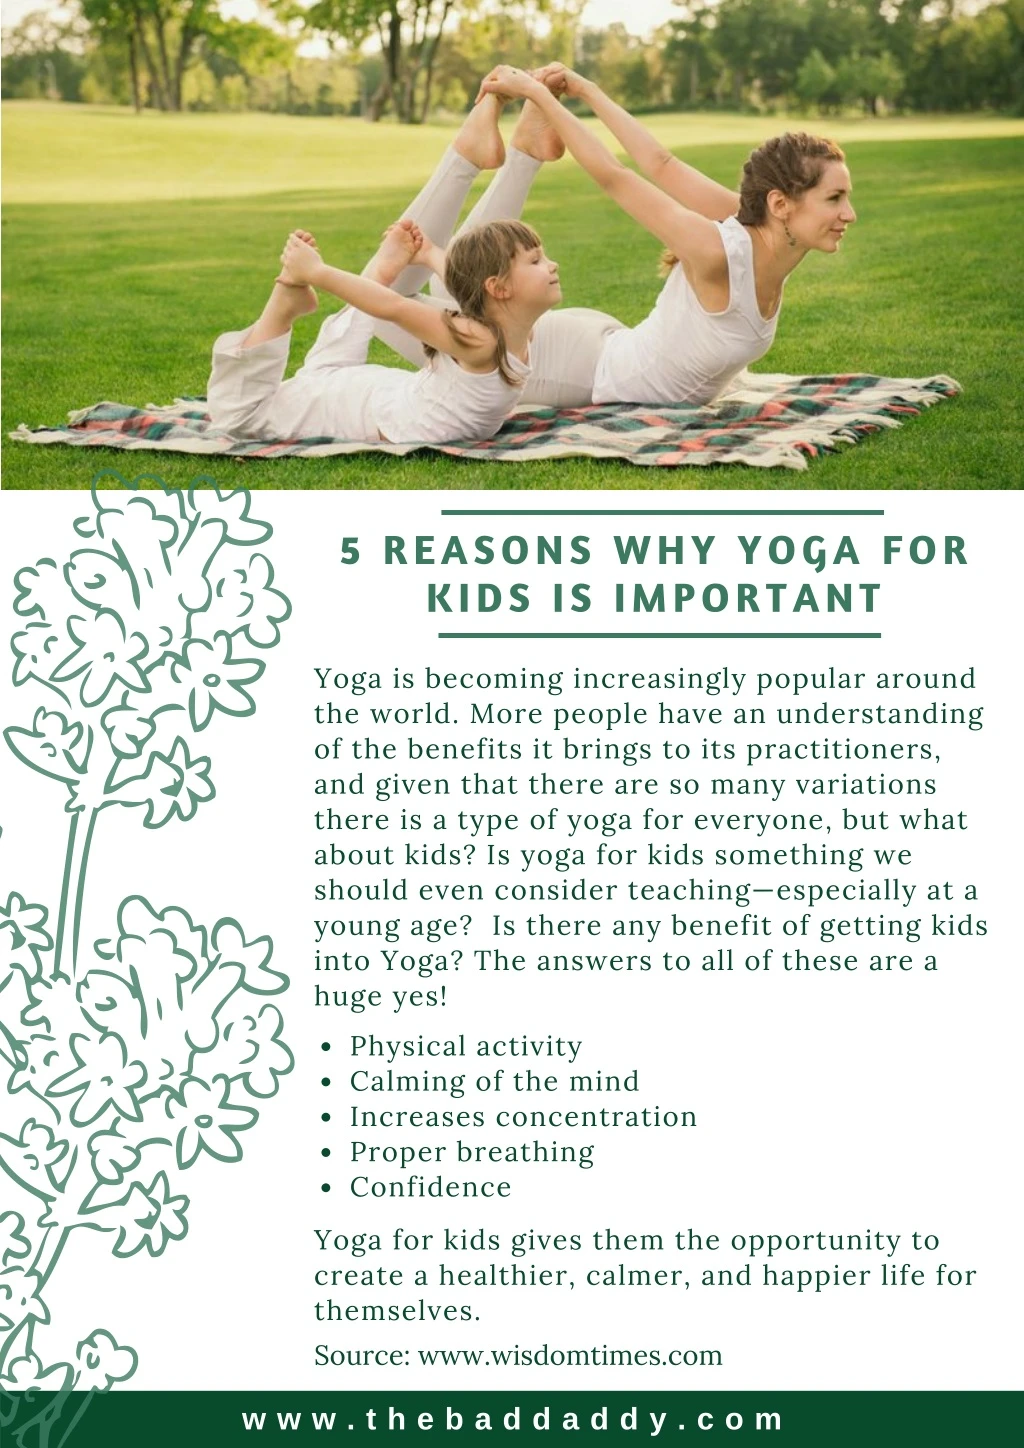 5 reasons why yoga for kids is important